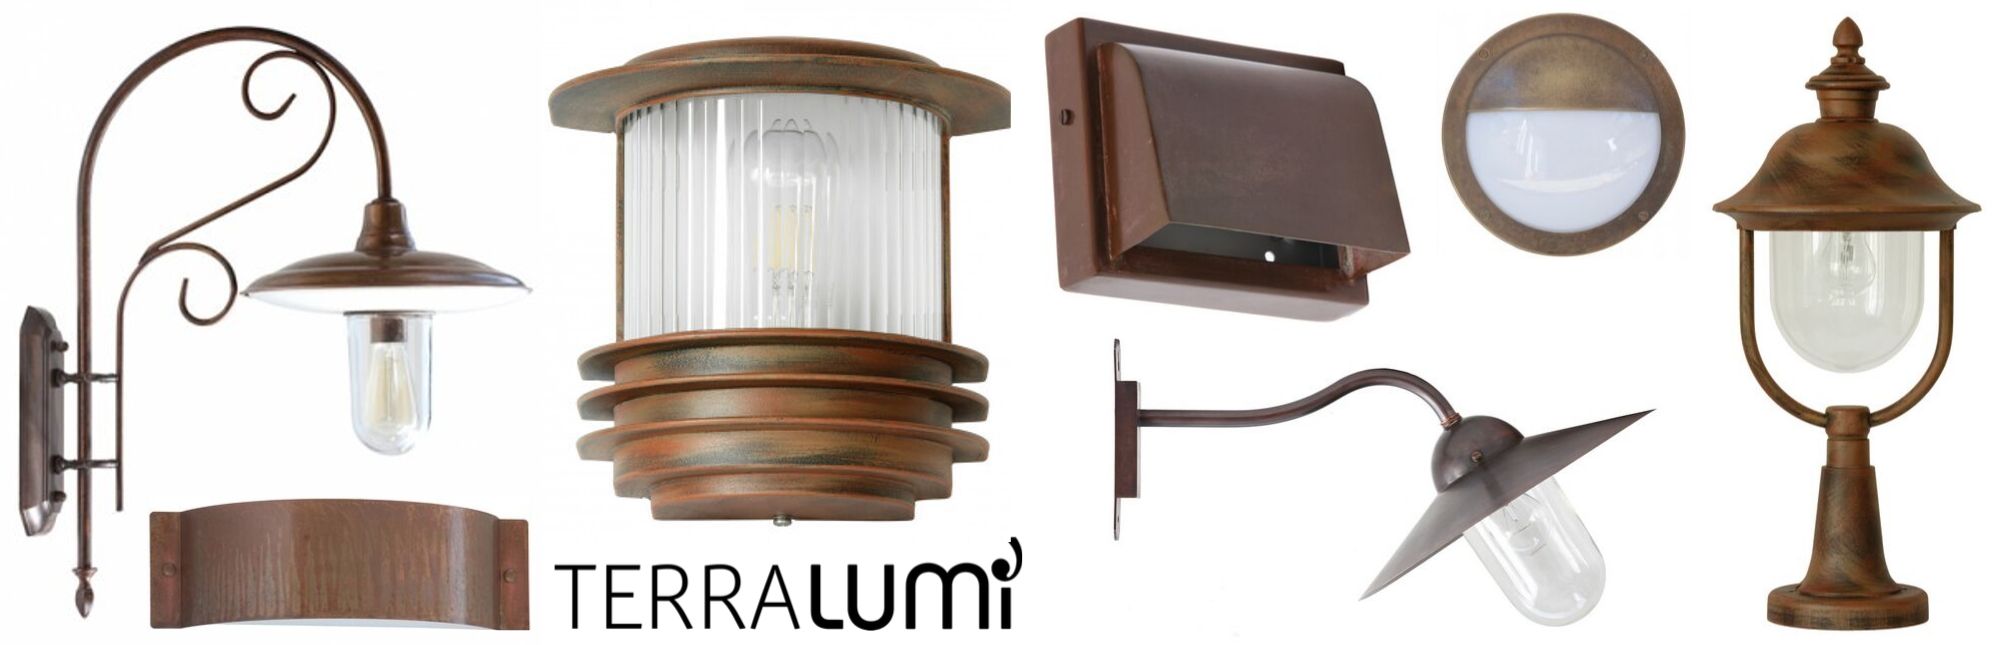 https://www.terralumi.com/images/tag_images/Aussenlampen-braun_page_1.jpg